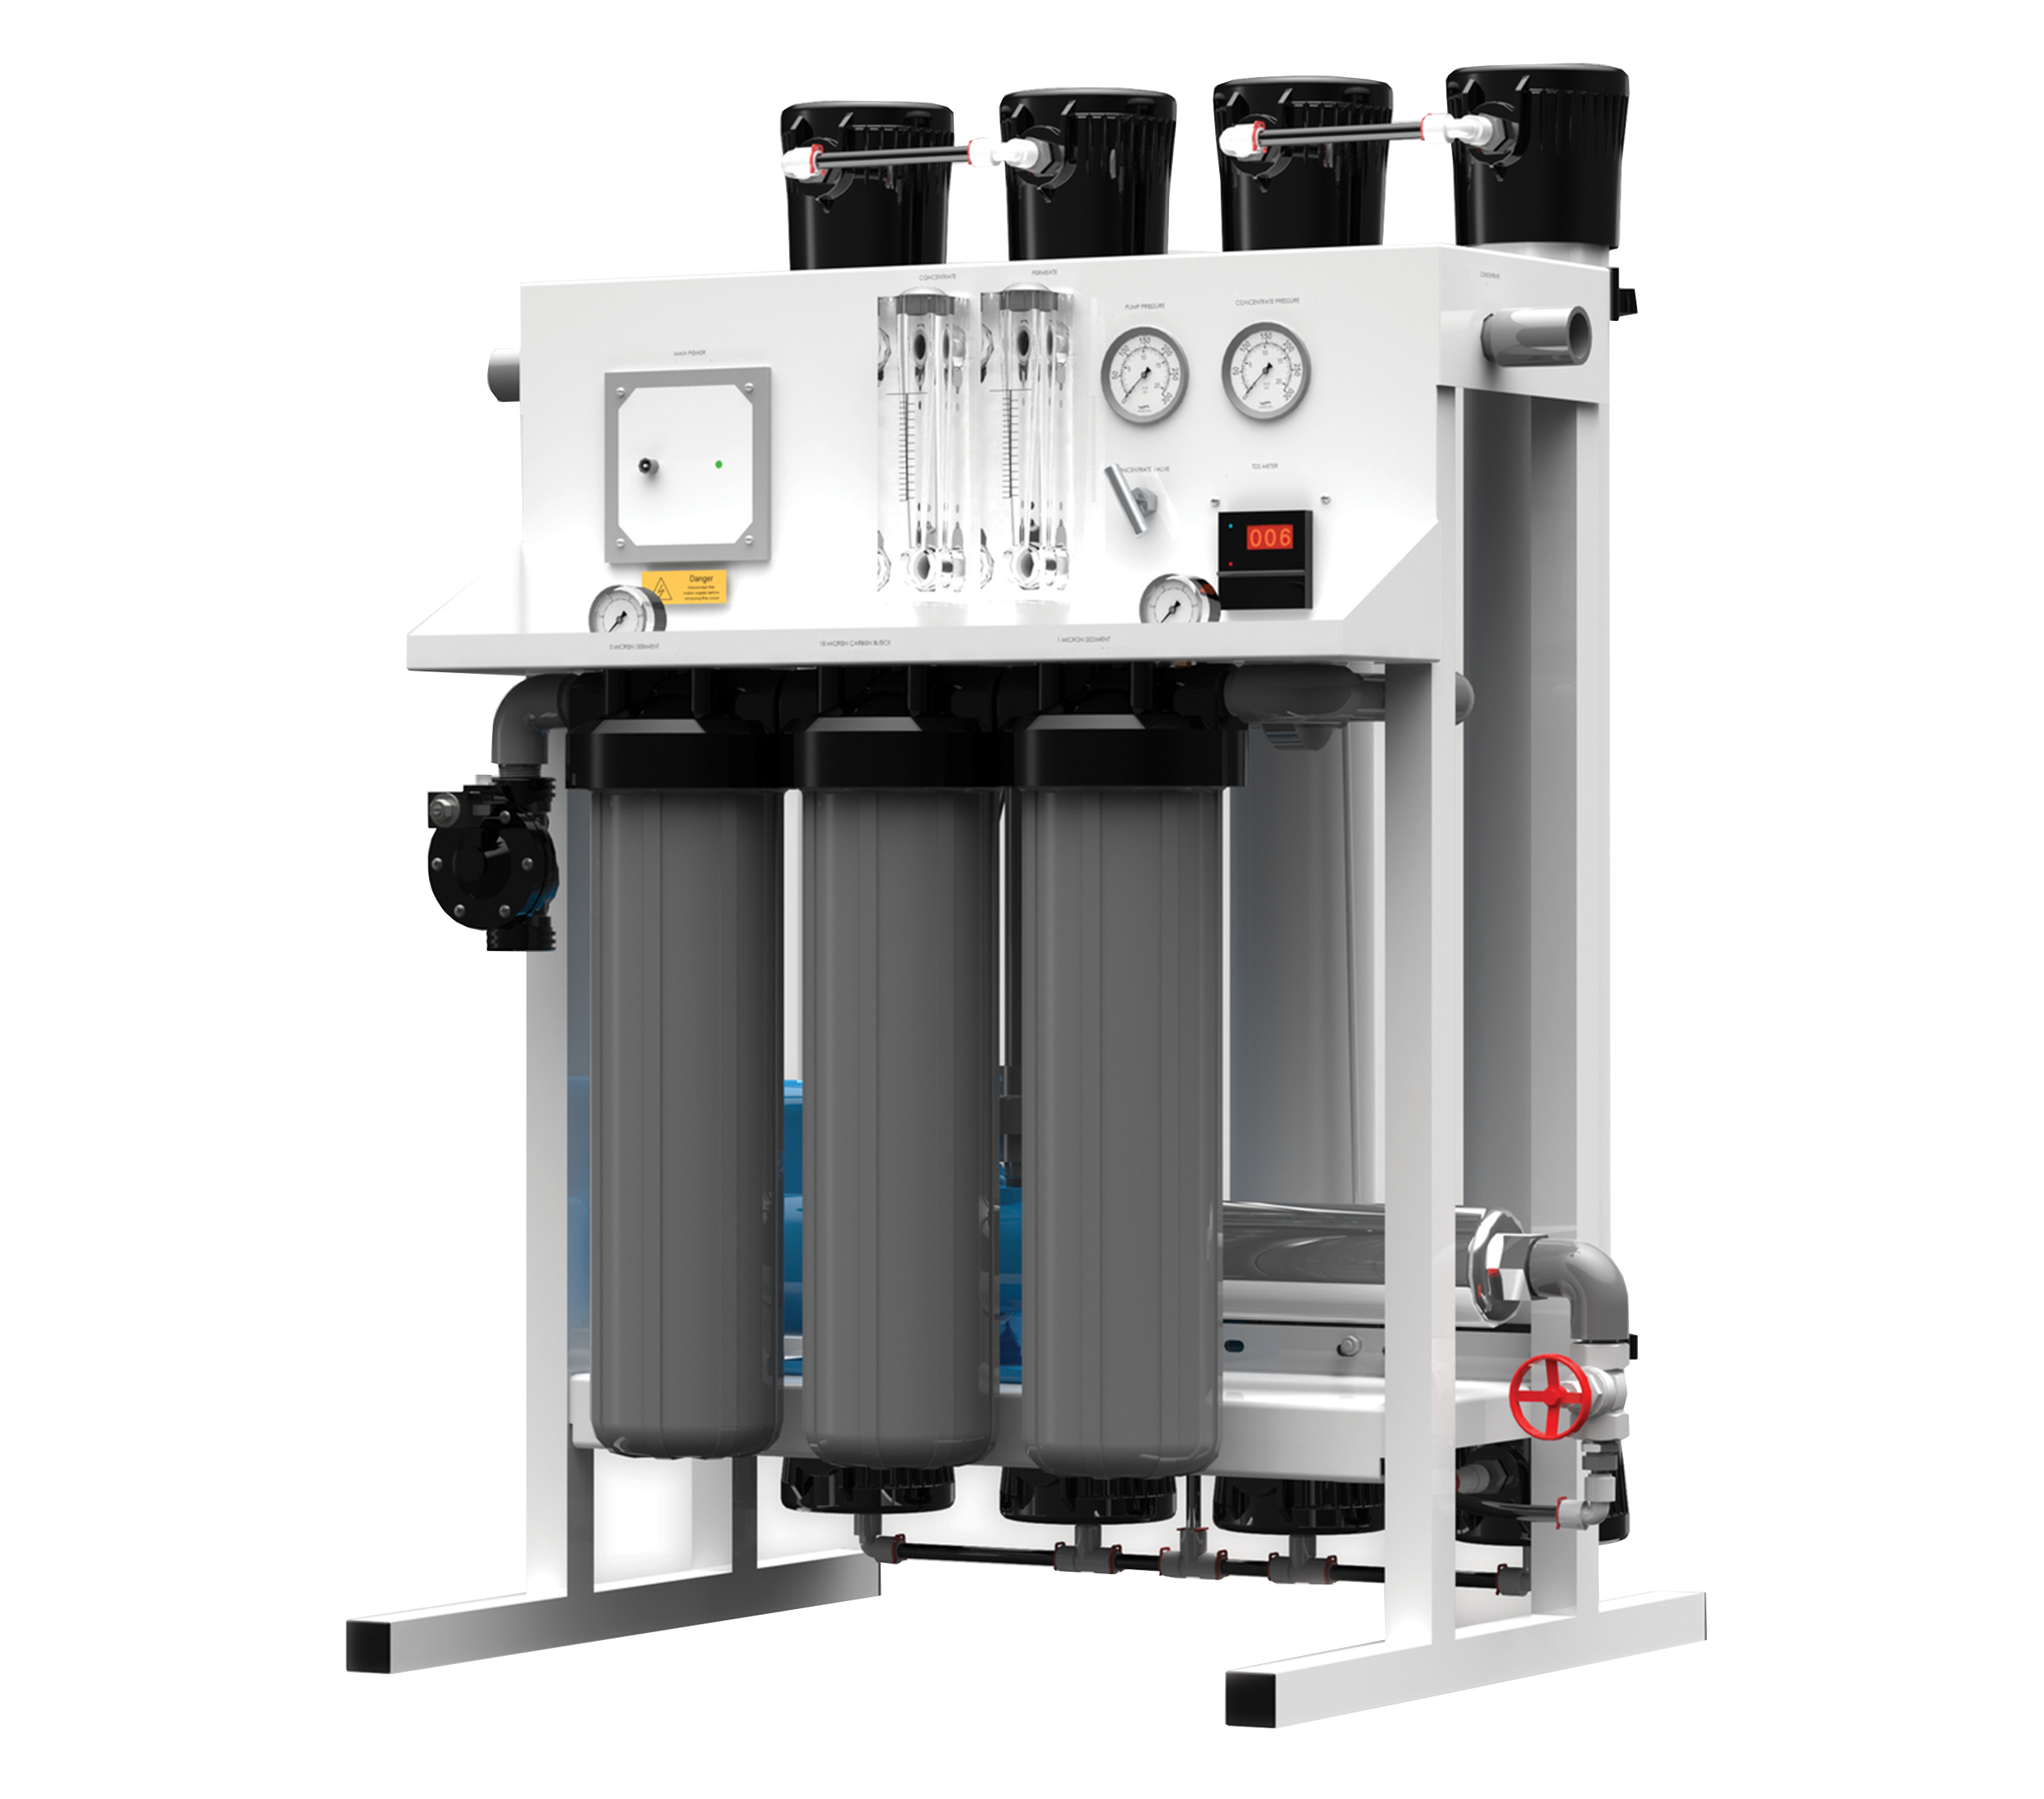 Complete Commercial Water System | 8800 GPD Water Filter System | Commercial Reverse Osmosis Water Filter System